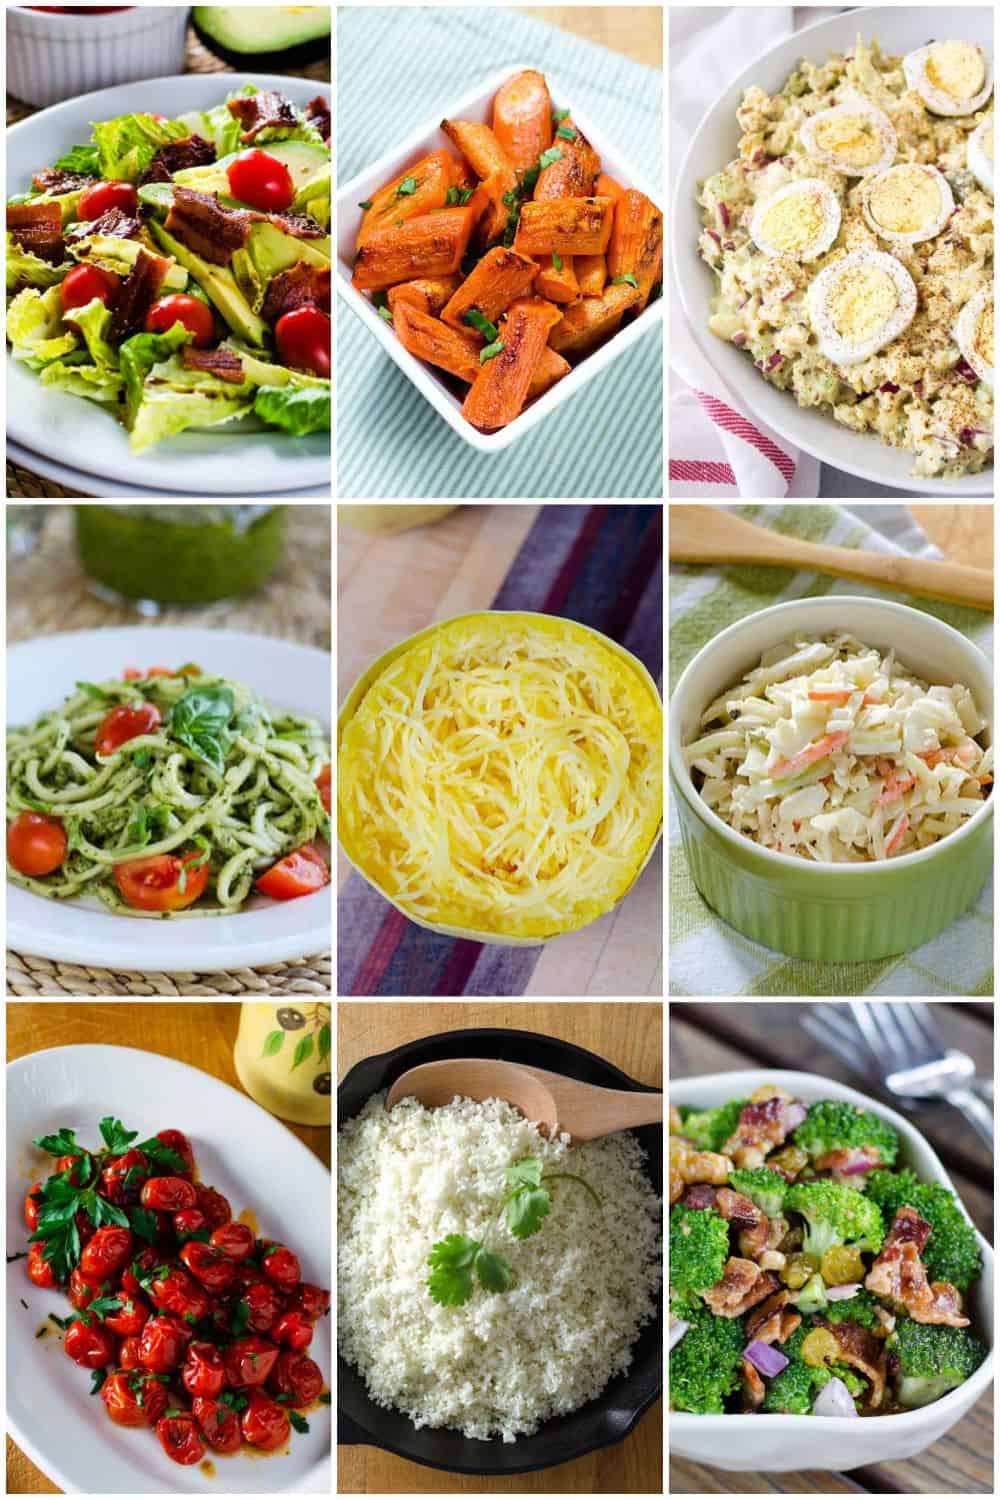 Low carb side dishes